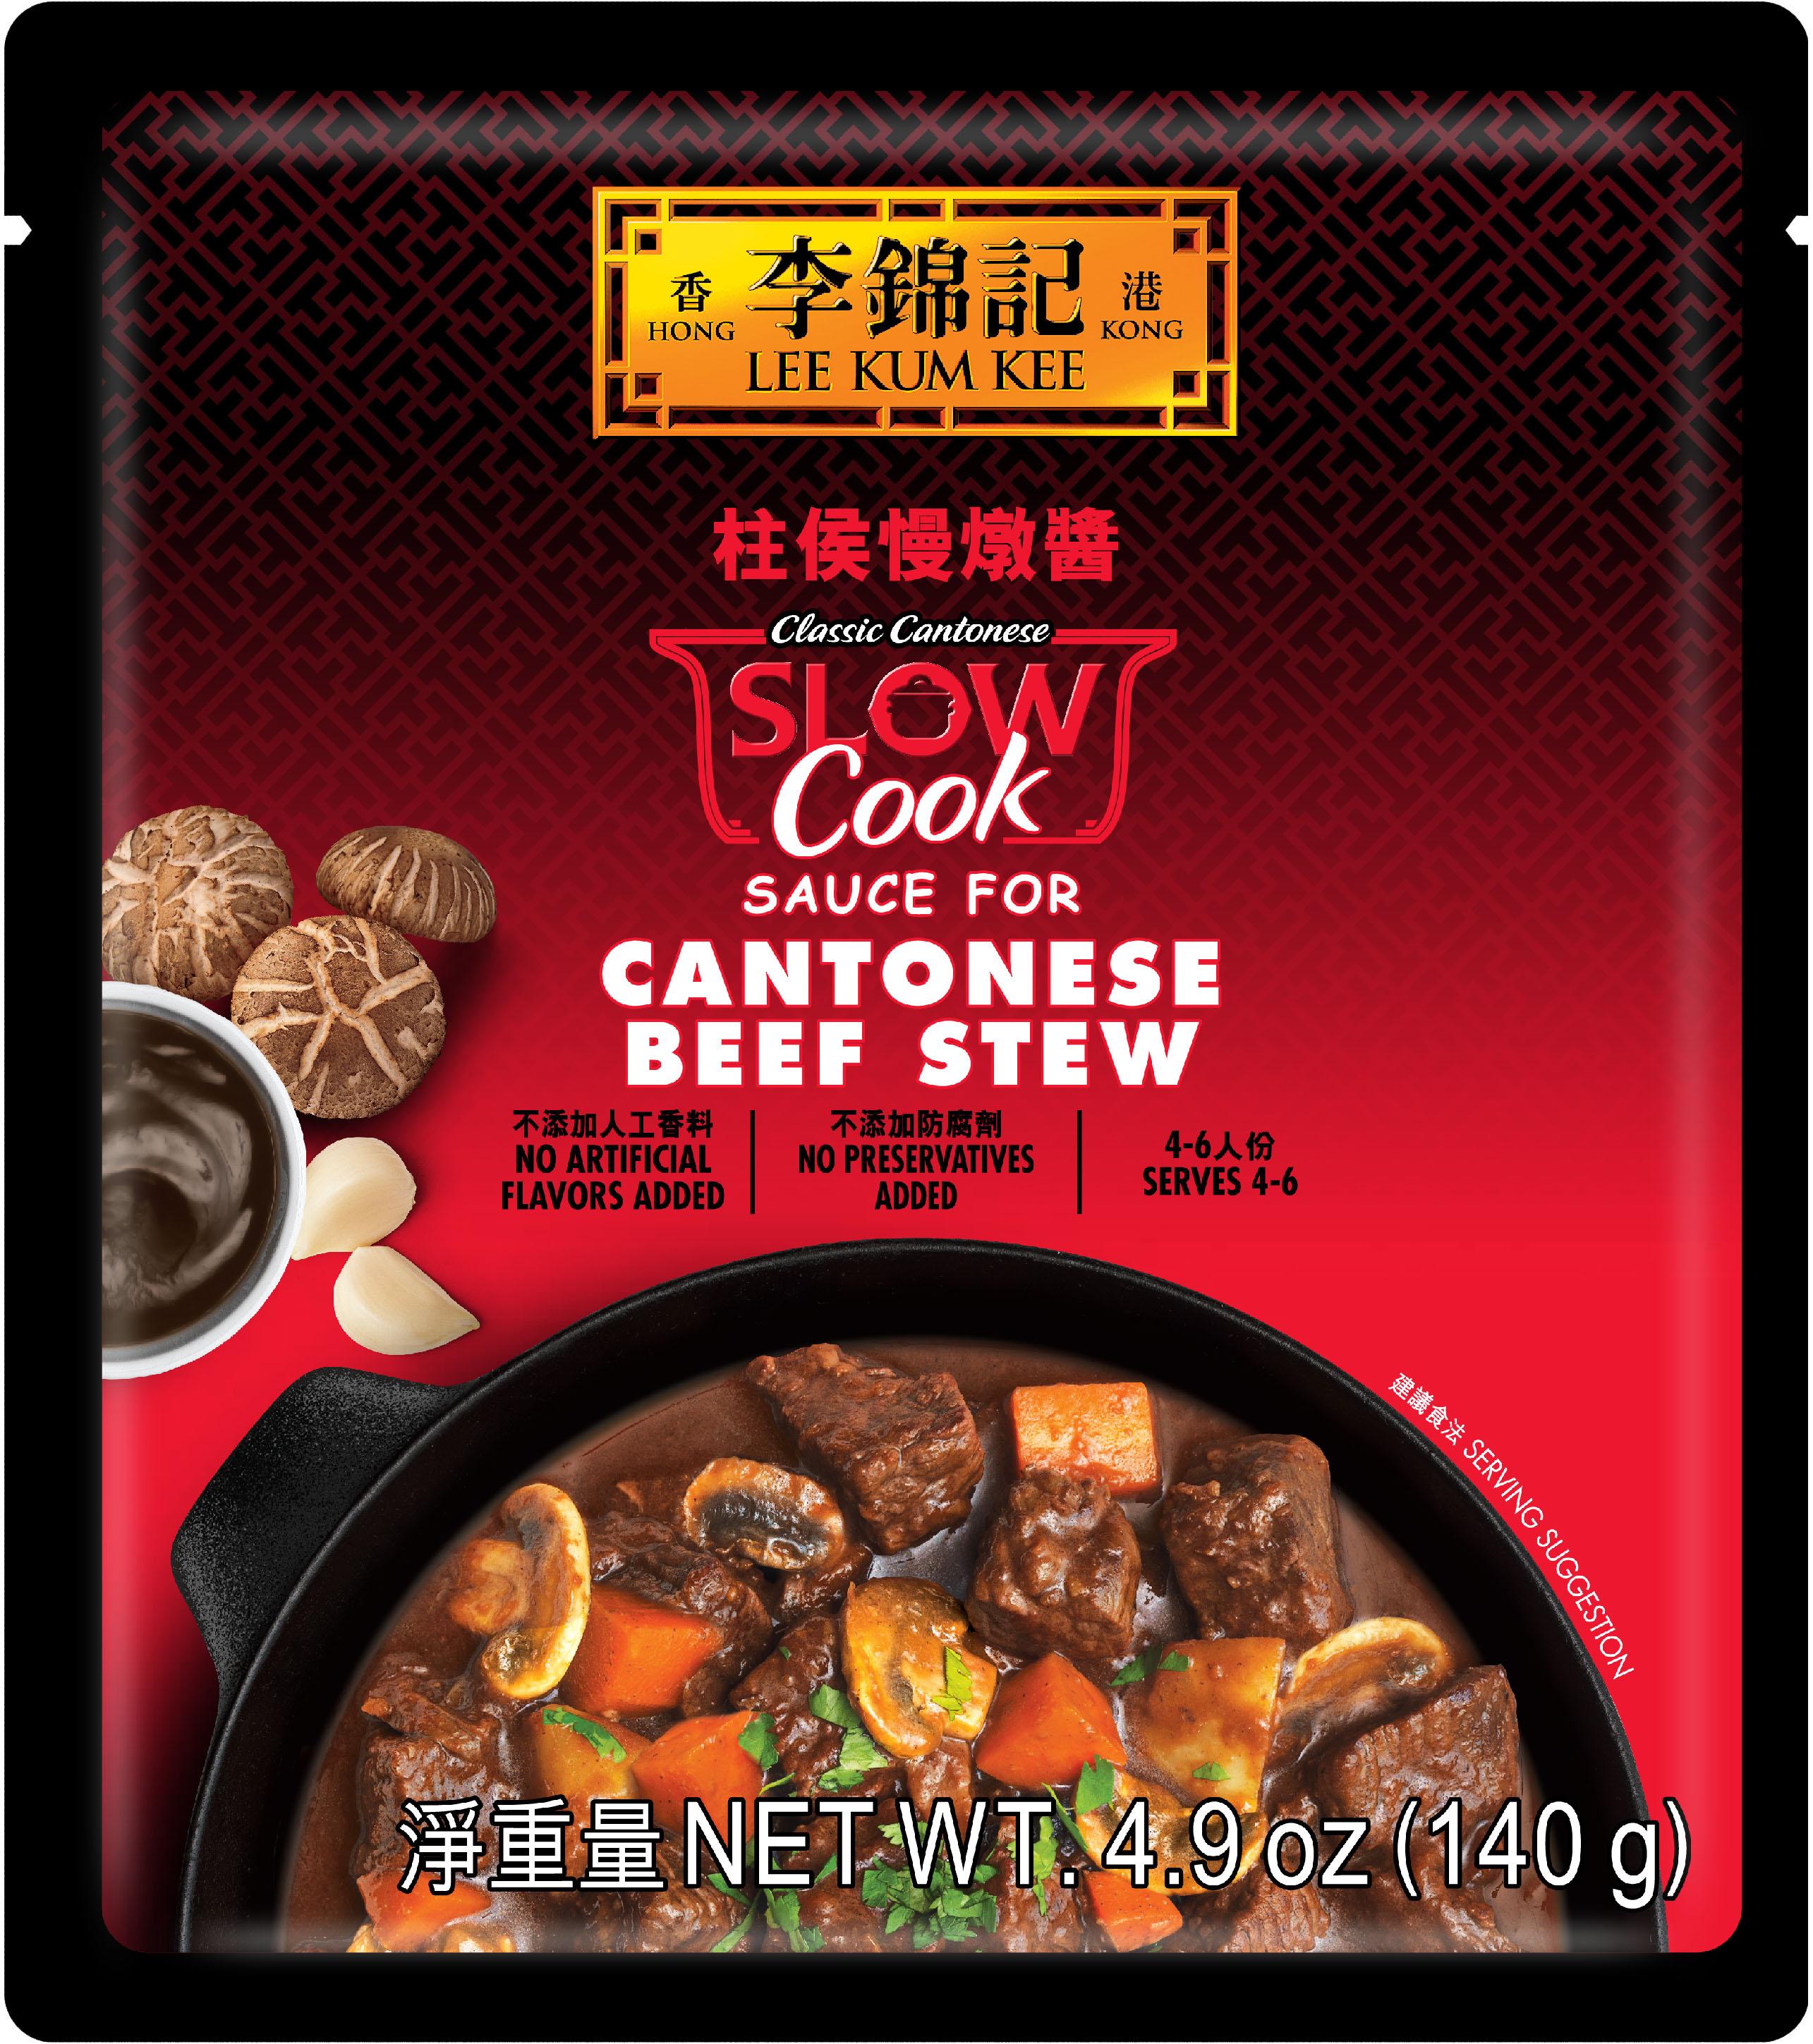 Slow Cook Sauce for Cantonese Beef Stew, 4.9 oz (140 g), Sauce Pack